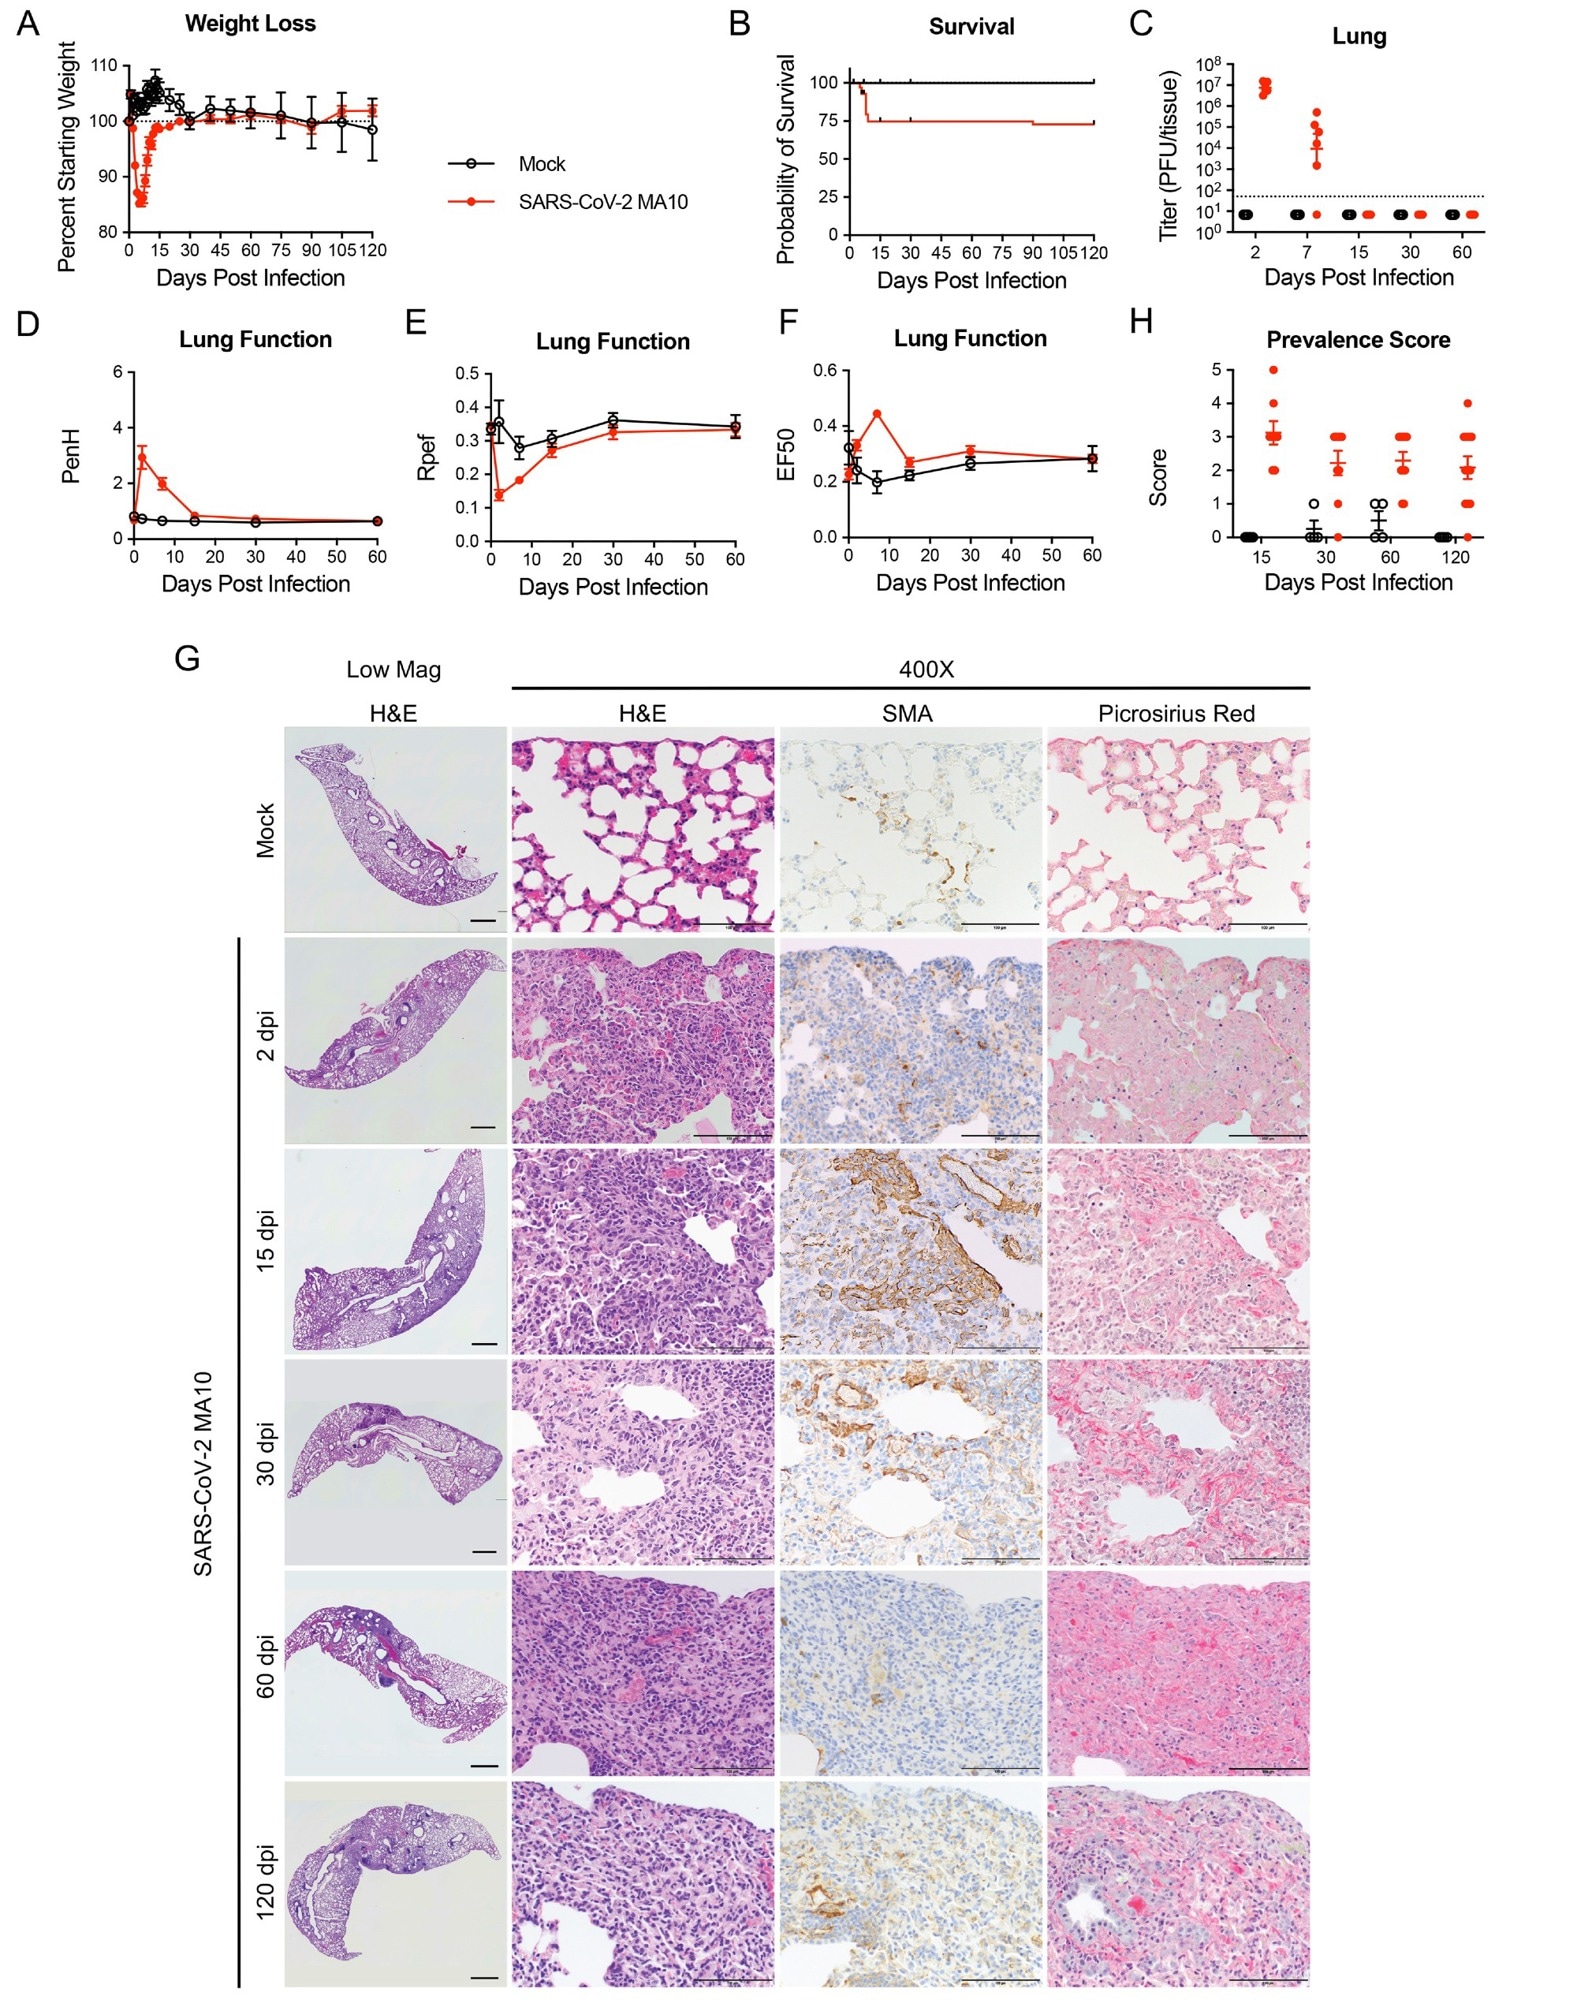 SARS-CoV-2 MA10 infection causes lung damage in surviving aged mice.  One-year-old female BALB/c mice were infected with 103 PFU SARS-CoV-2 MA10 (n=74) or PBS (n=24) and monitored for (A) percentage of baseline weight and (B ) the survival.  (C) Lung titers of log-transformed infectious virus were assayed at the indicated time points.  The dotted line represents LOD.  Undetected samples are plotted at half LOD.  (D to F) Lung function was assessed by whole body plethysmography for (D) PenH, (E) Rpef and (F) EF50.  (G) Histopathological analysis of the lungs at the indicated time points is shown.  H&E indicates hematoxylin and eosin staining.  SMA indicates DAB labeling immunohistochemistry (brown) for α smooth muscle actin.  The Picrosirius Red stain (bright pink-red) highlights the collagen fibers.  Image scale bars represent 1000 μm for low magnification and 100 μm for 400X images.  (H) The disease incidence score is shown for the indicated time points: 0 = 0% of the total area of ​​the section examined, 1 = less than 5%;  2 = 6 to 10%;  3 = 11 to 50%;  4 = 51-95%;  5 = greater than 95%.  Graphs represent autopsied individuals at each time point (C and H), with the mean value for each treatment and error bars representing the standard error of the mean.  Simulated infected animals are represented by open black circles and animals infected with SARS-CoV-2 MA10 are represented by closed red circles.